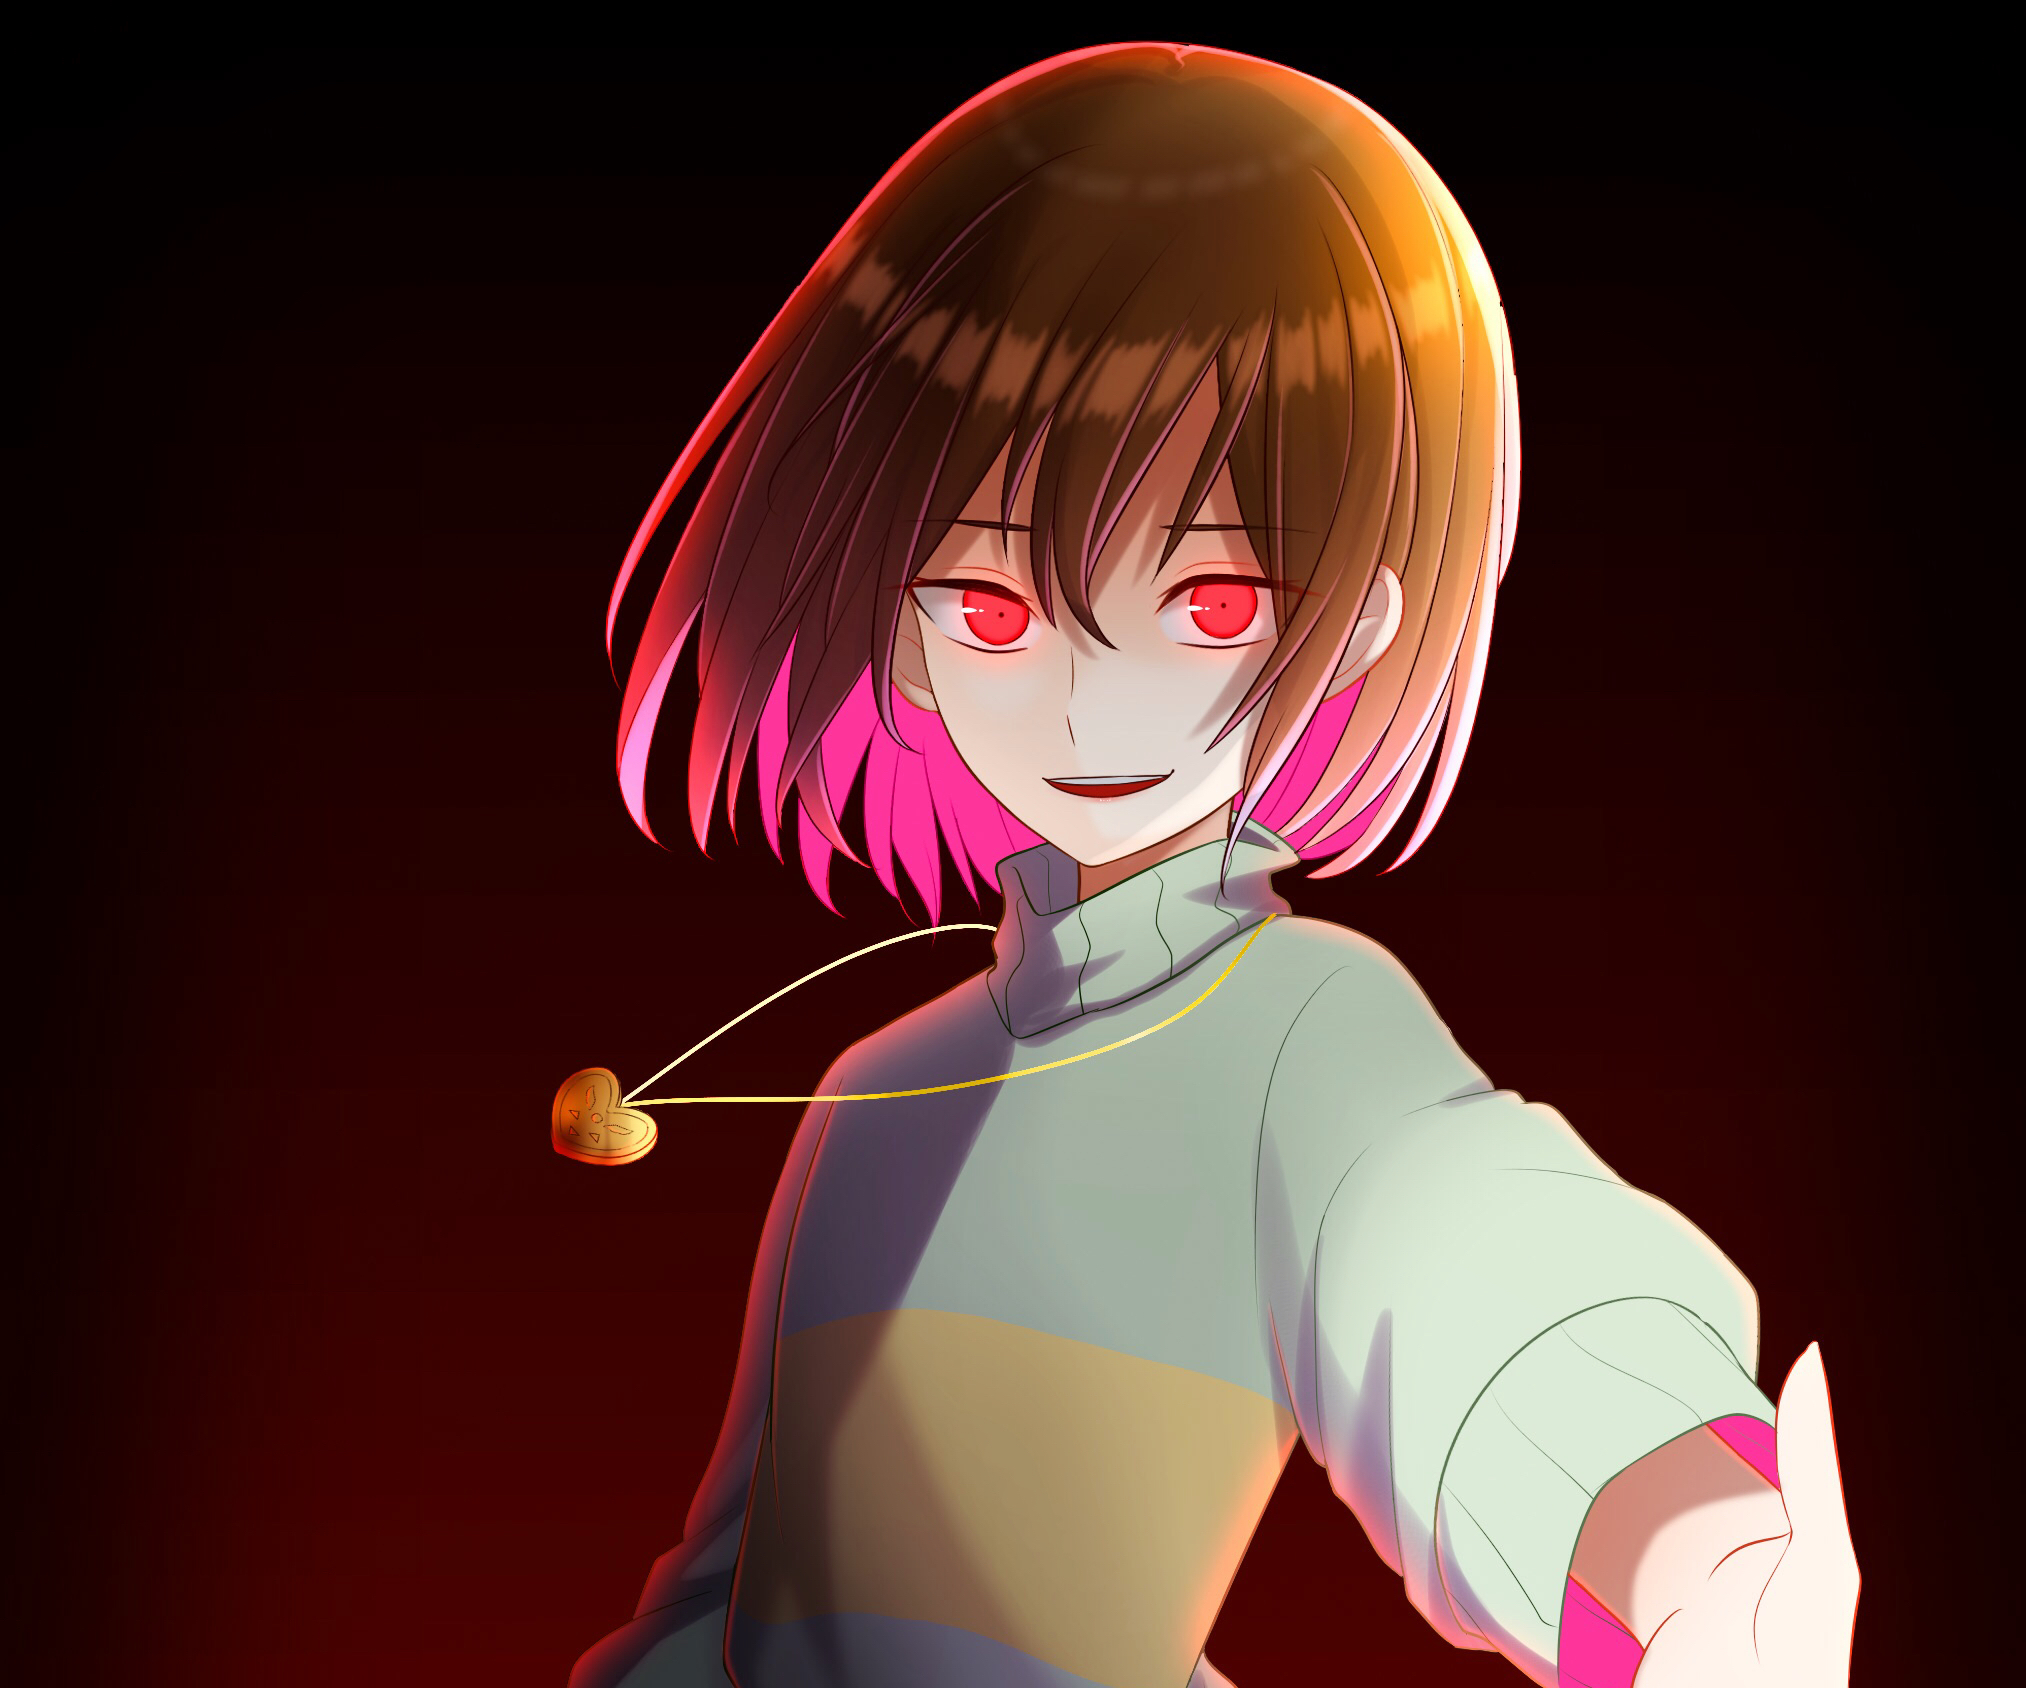 Undertale Chara Wallpaper 77 images